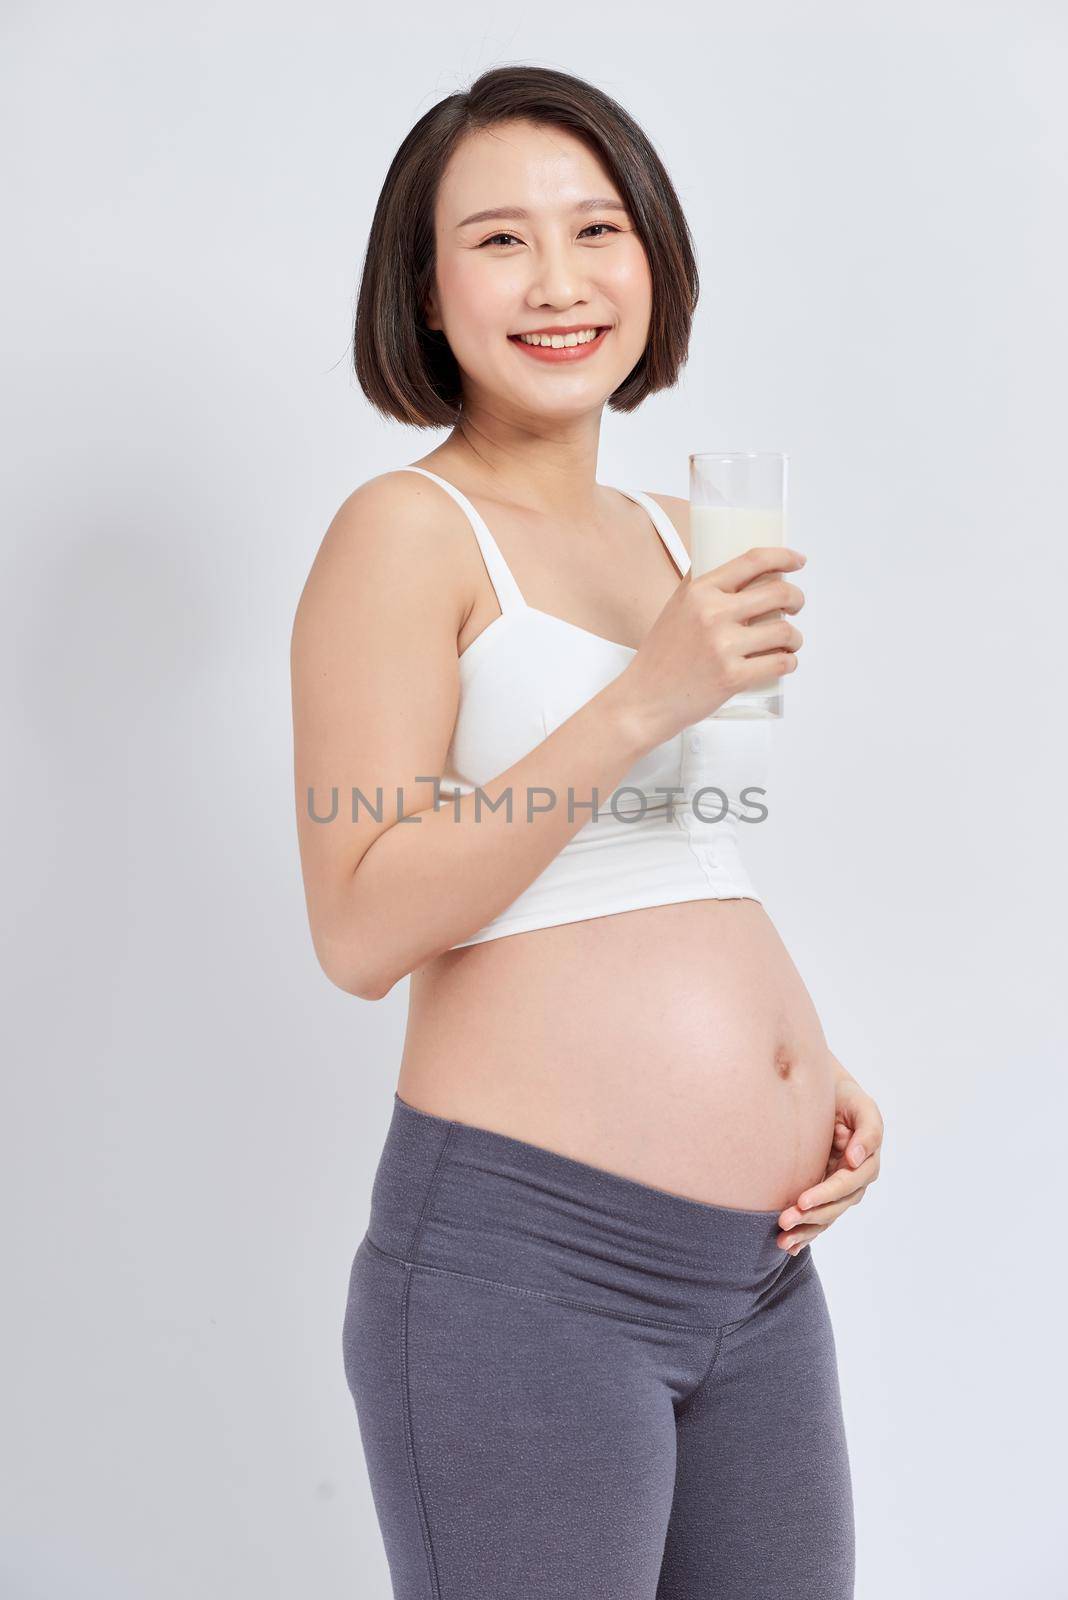 Pregnant woman holding glass of milk in her hand good healty, isolated on white background. by makidotvn